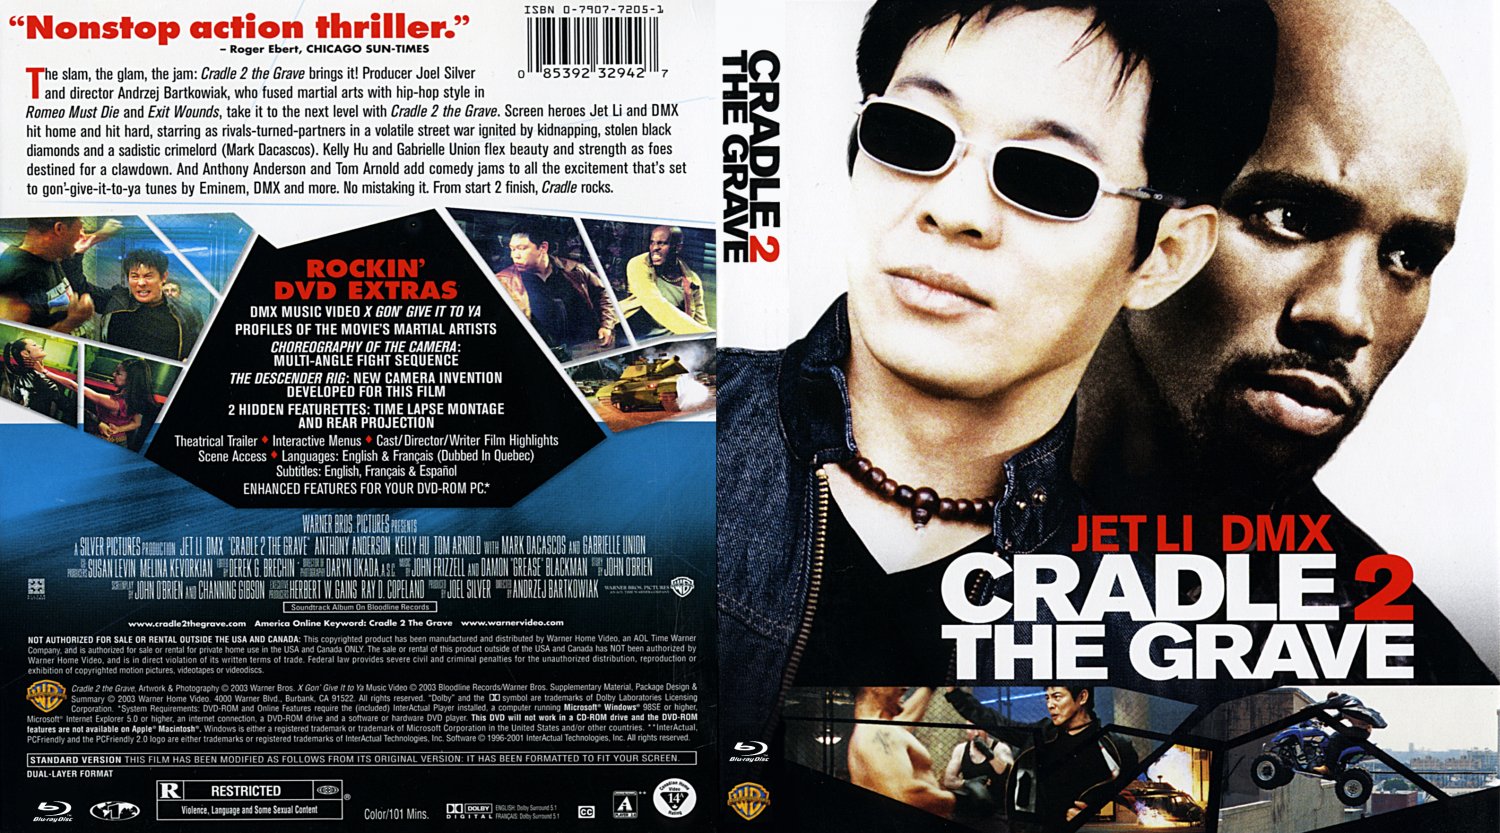 http://www.dvd-covers.org/d/294146-2/Cradle_2_The_Grave_2003_CustomBD.jpg